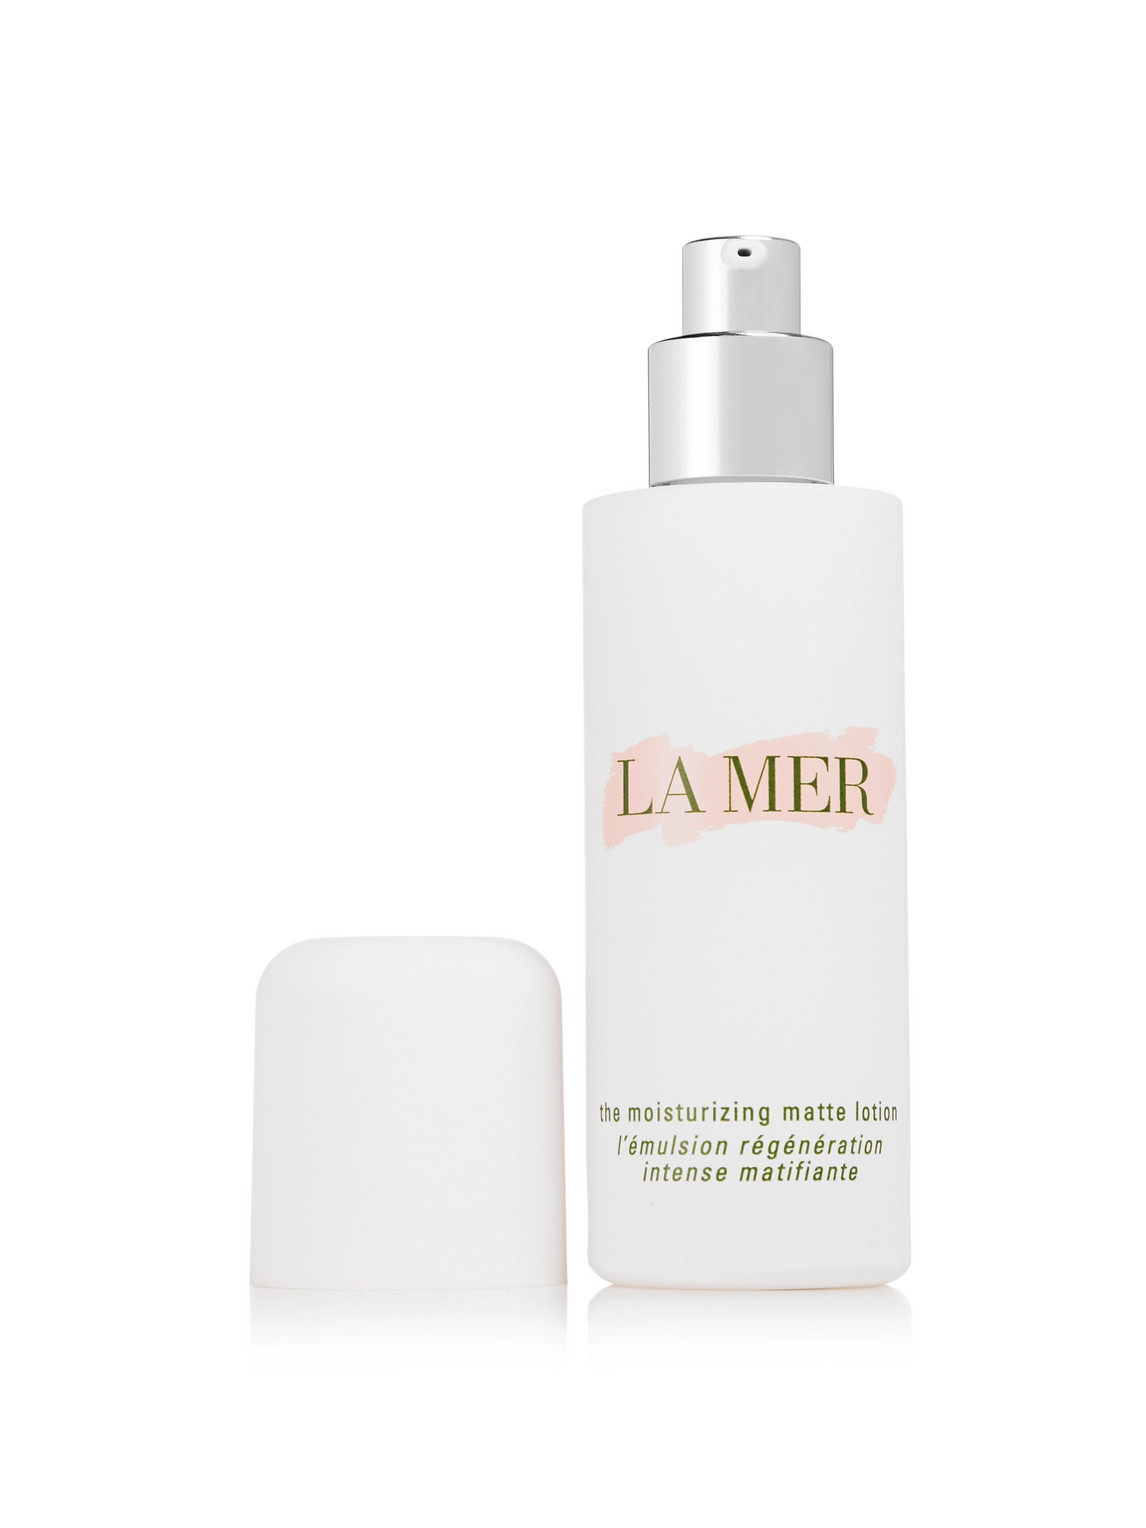 La Mer The Moisturizing Matte Lotion, 50ml In Colorless